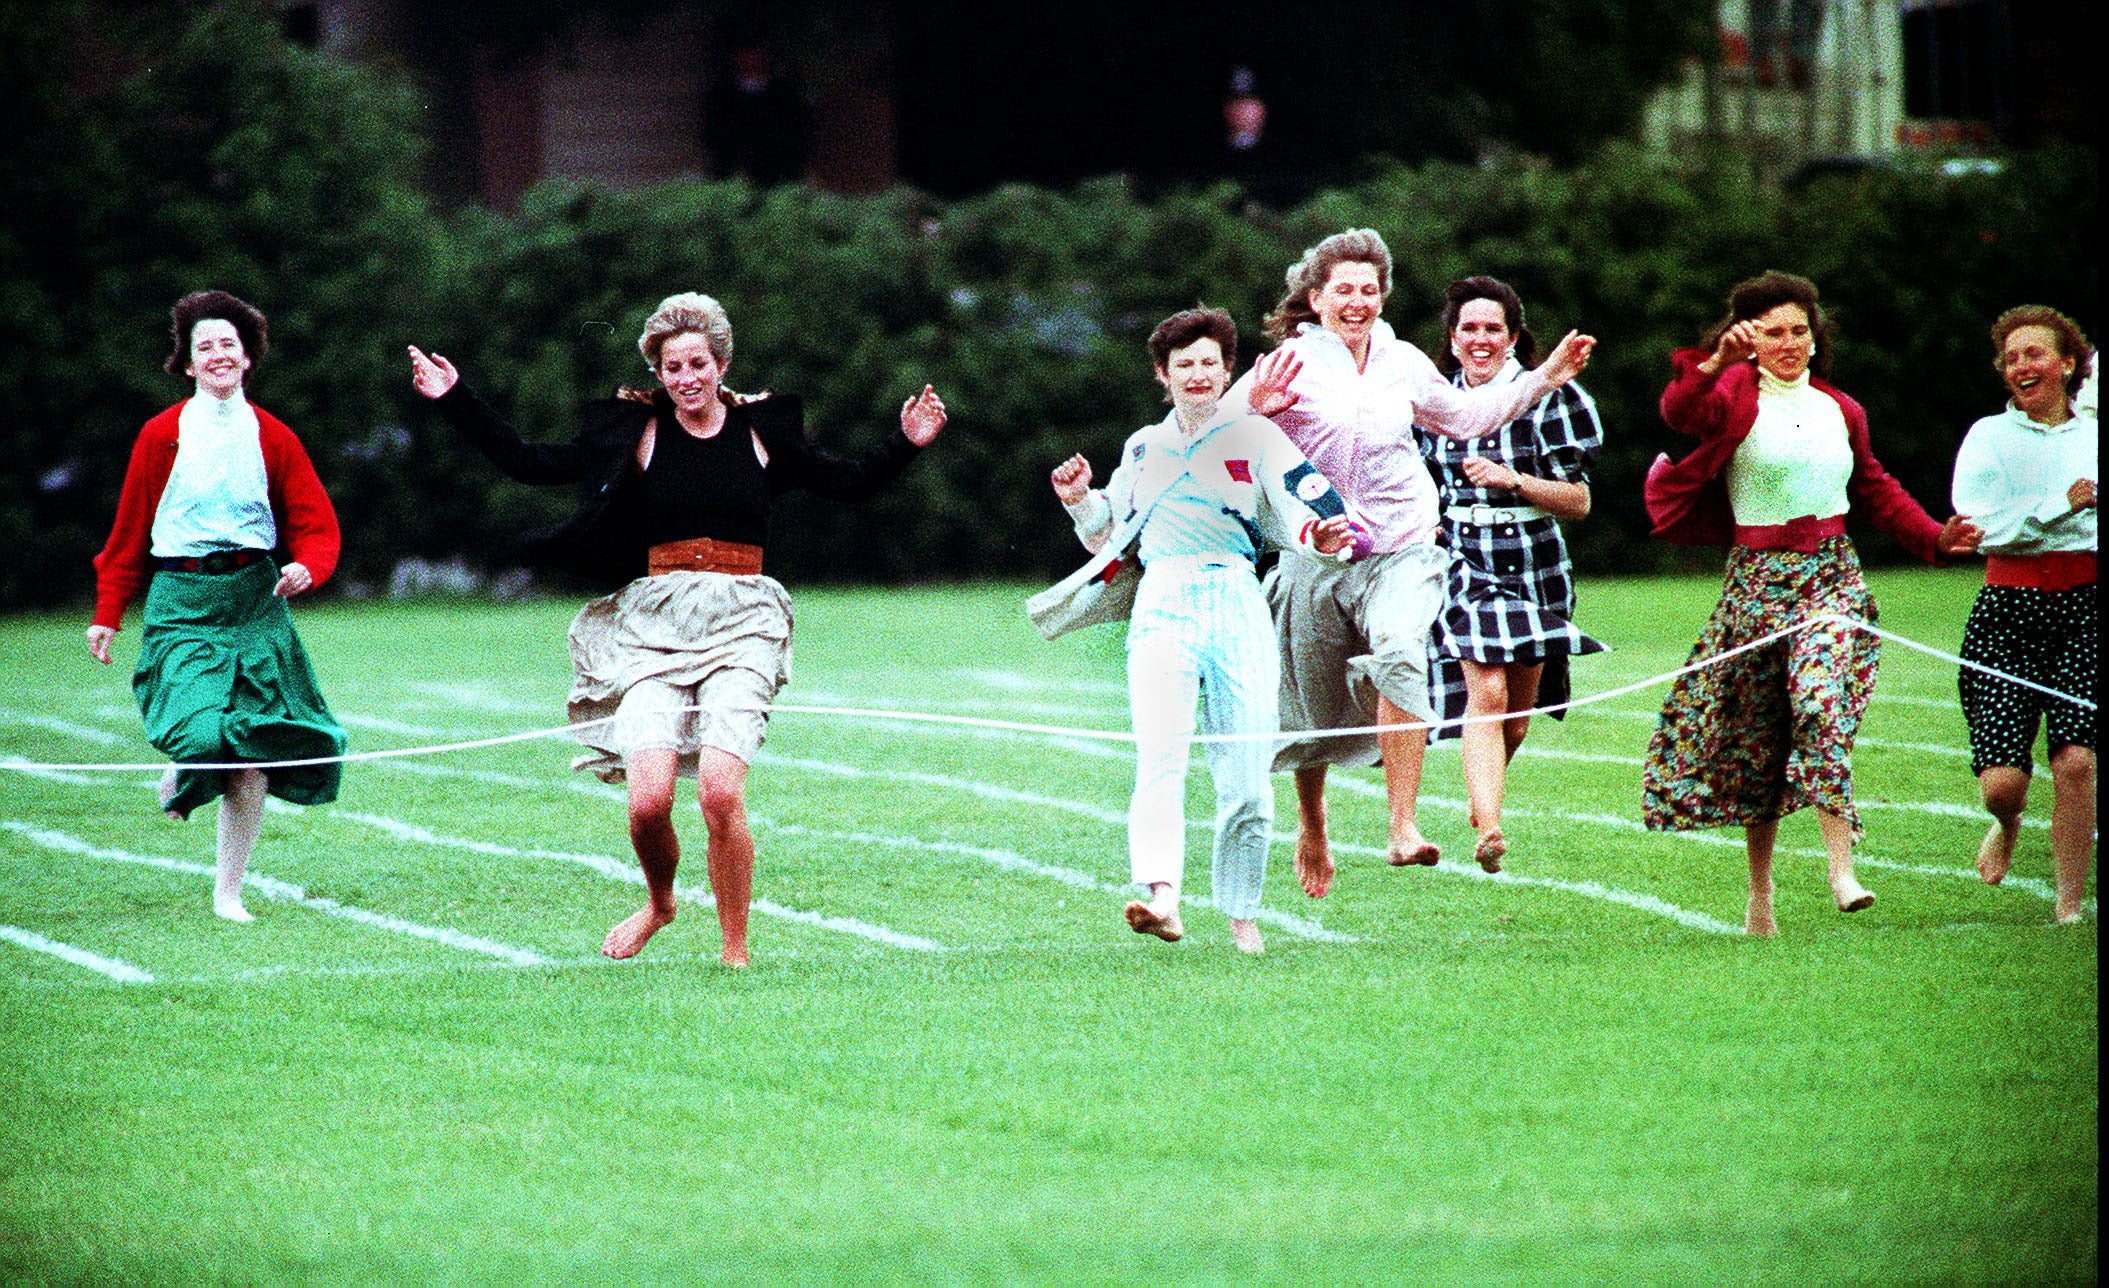 Diana taking part in the Mothers’ Race during Wetherby School Sports Day in 1991 (PA)